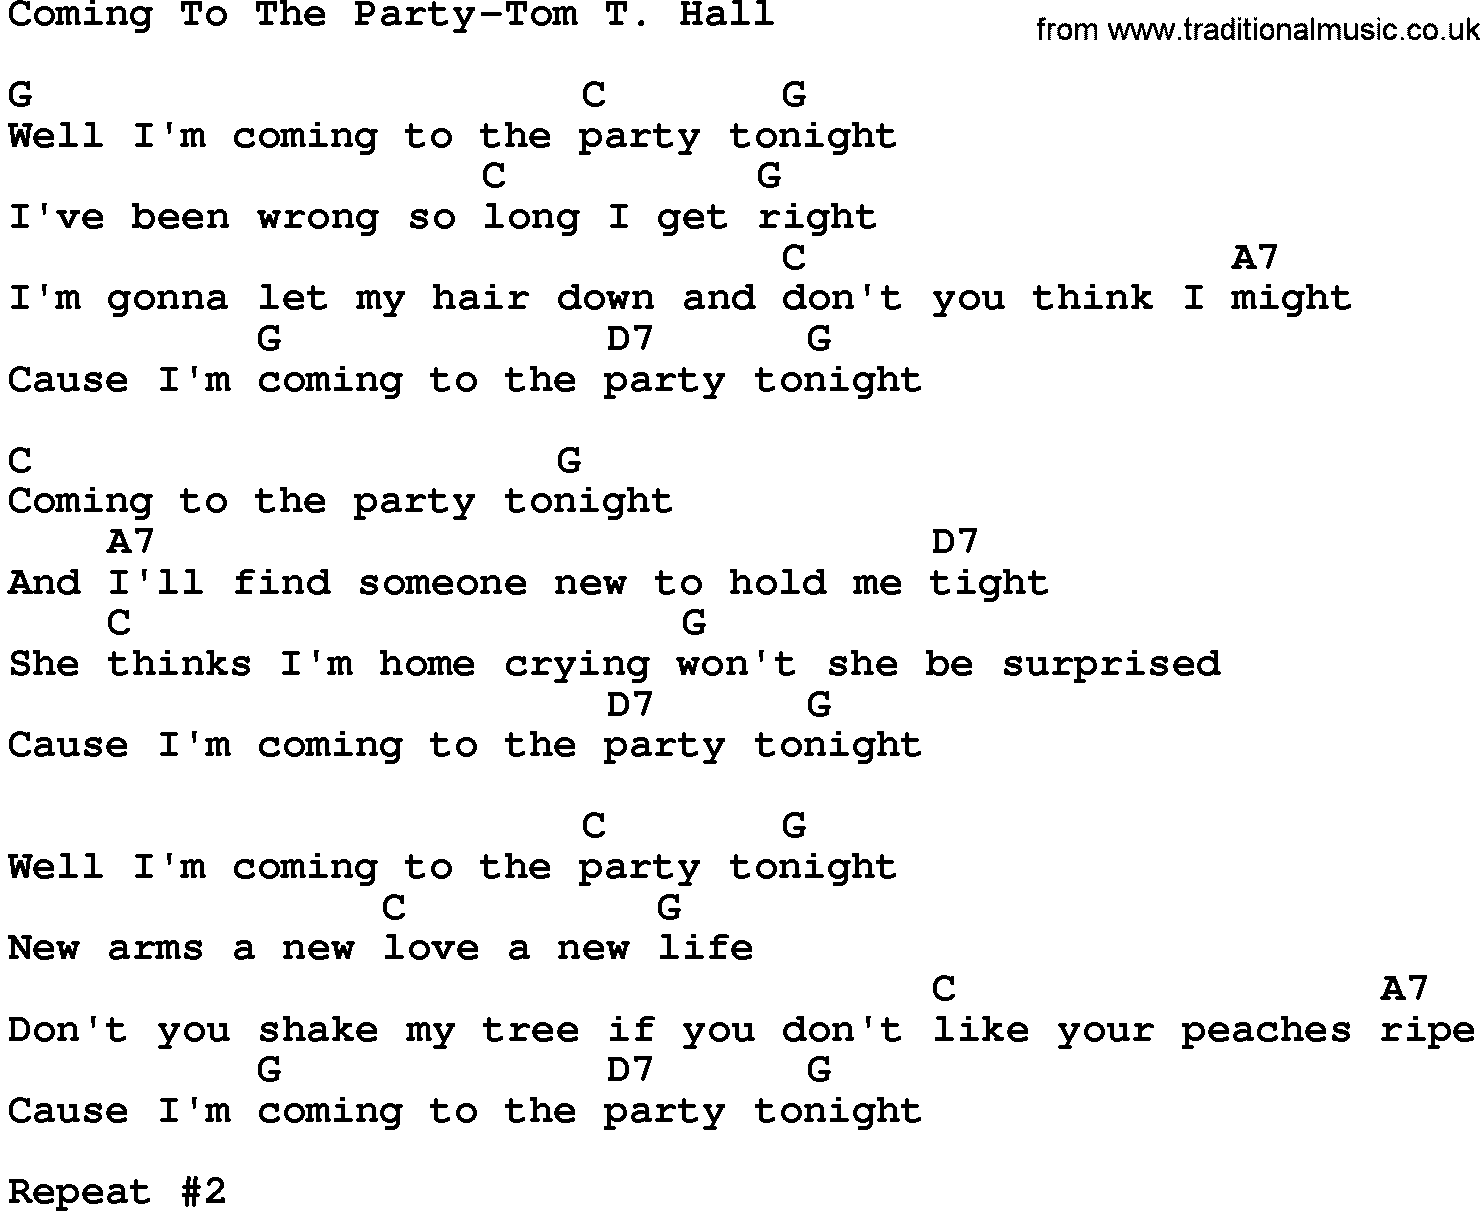 Country music song: Coming To The Party-Tom T Hall lyrics and chords